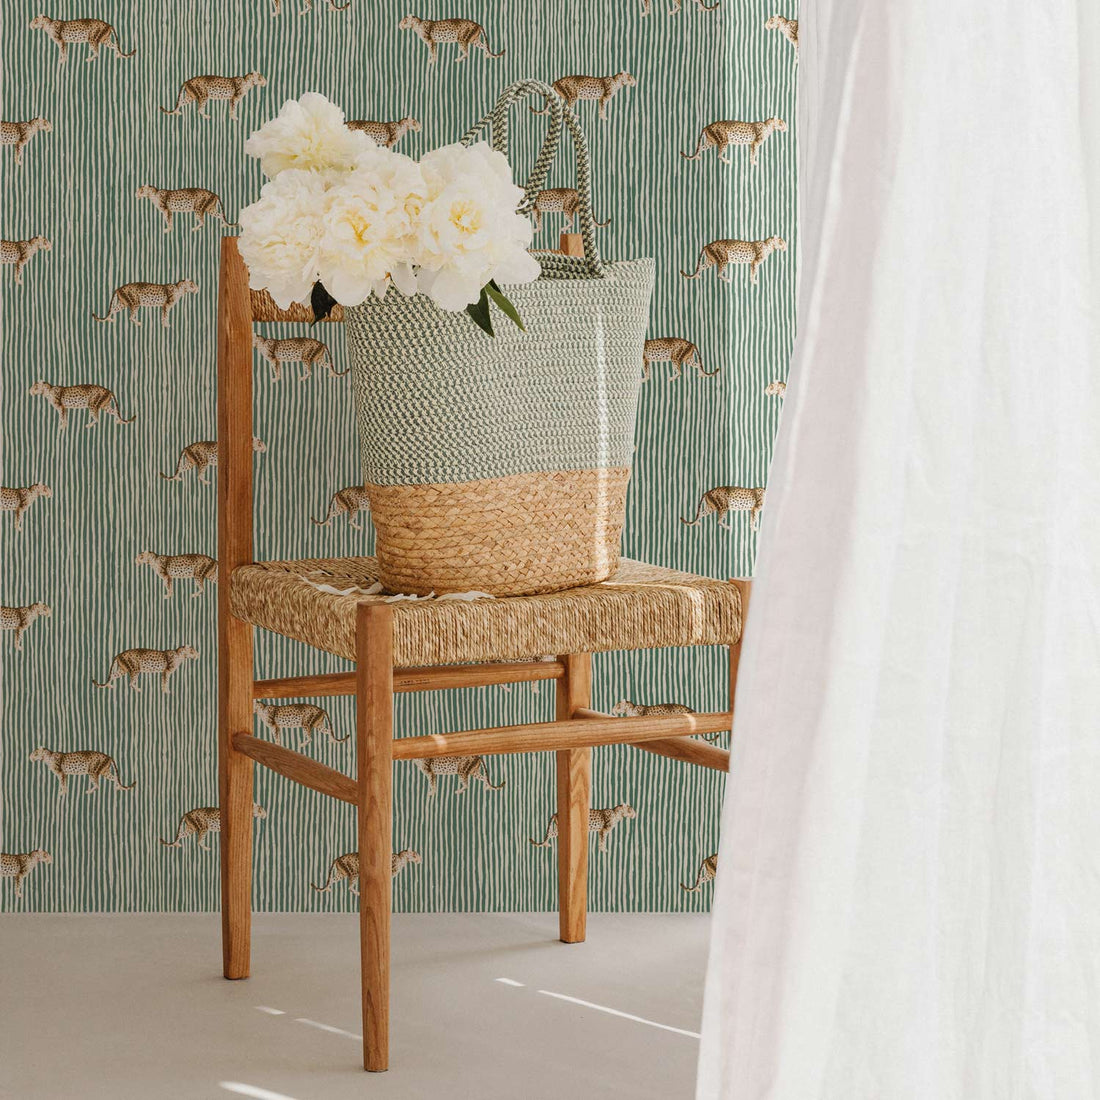 retro green wallpaper with tiger inspired print 